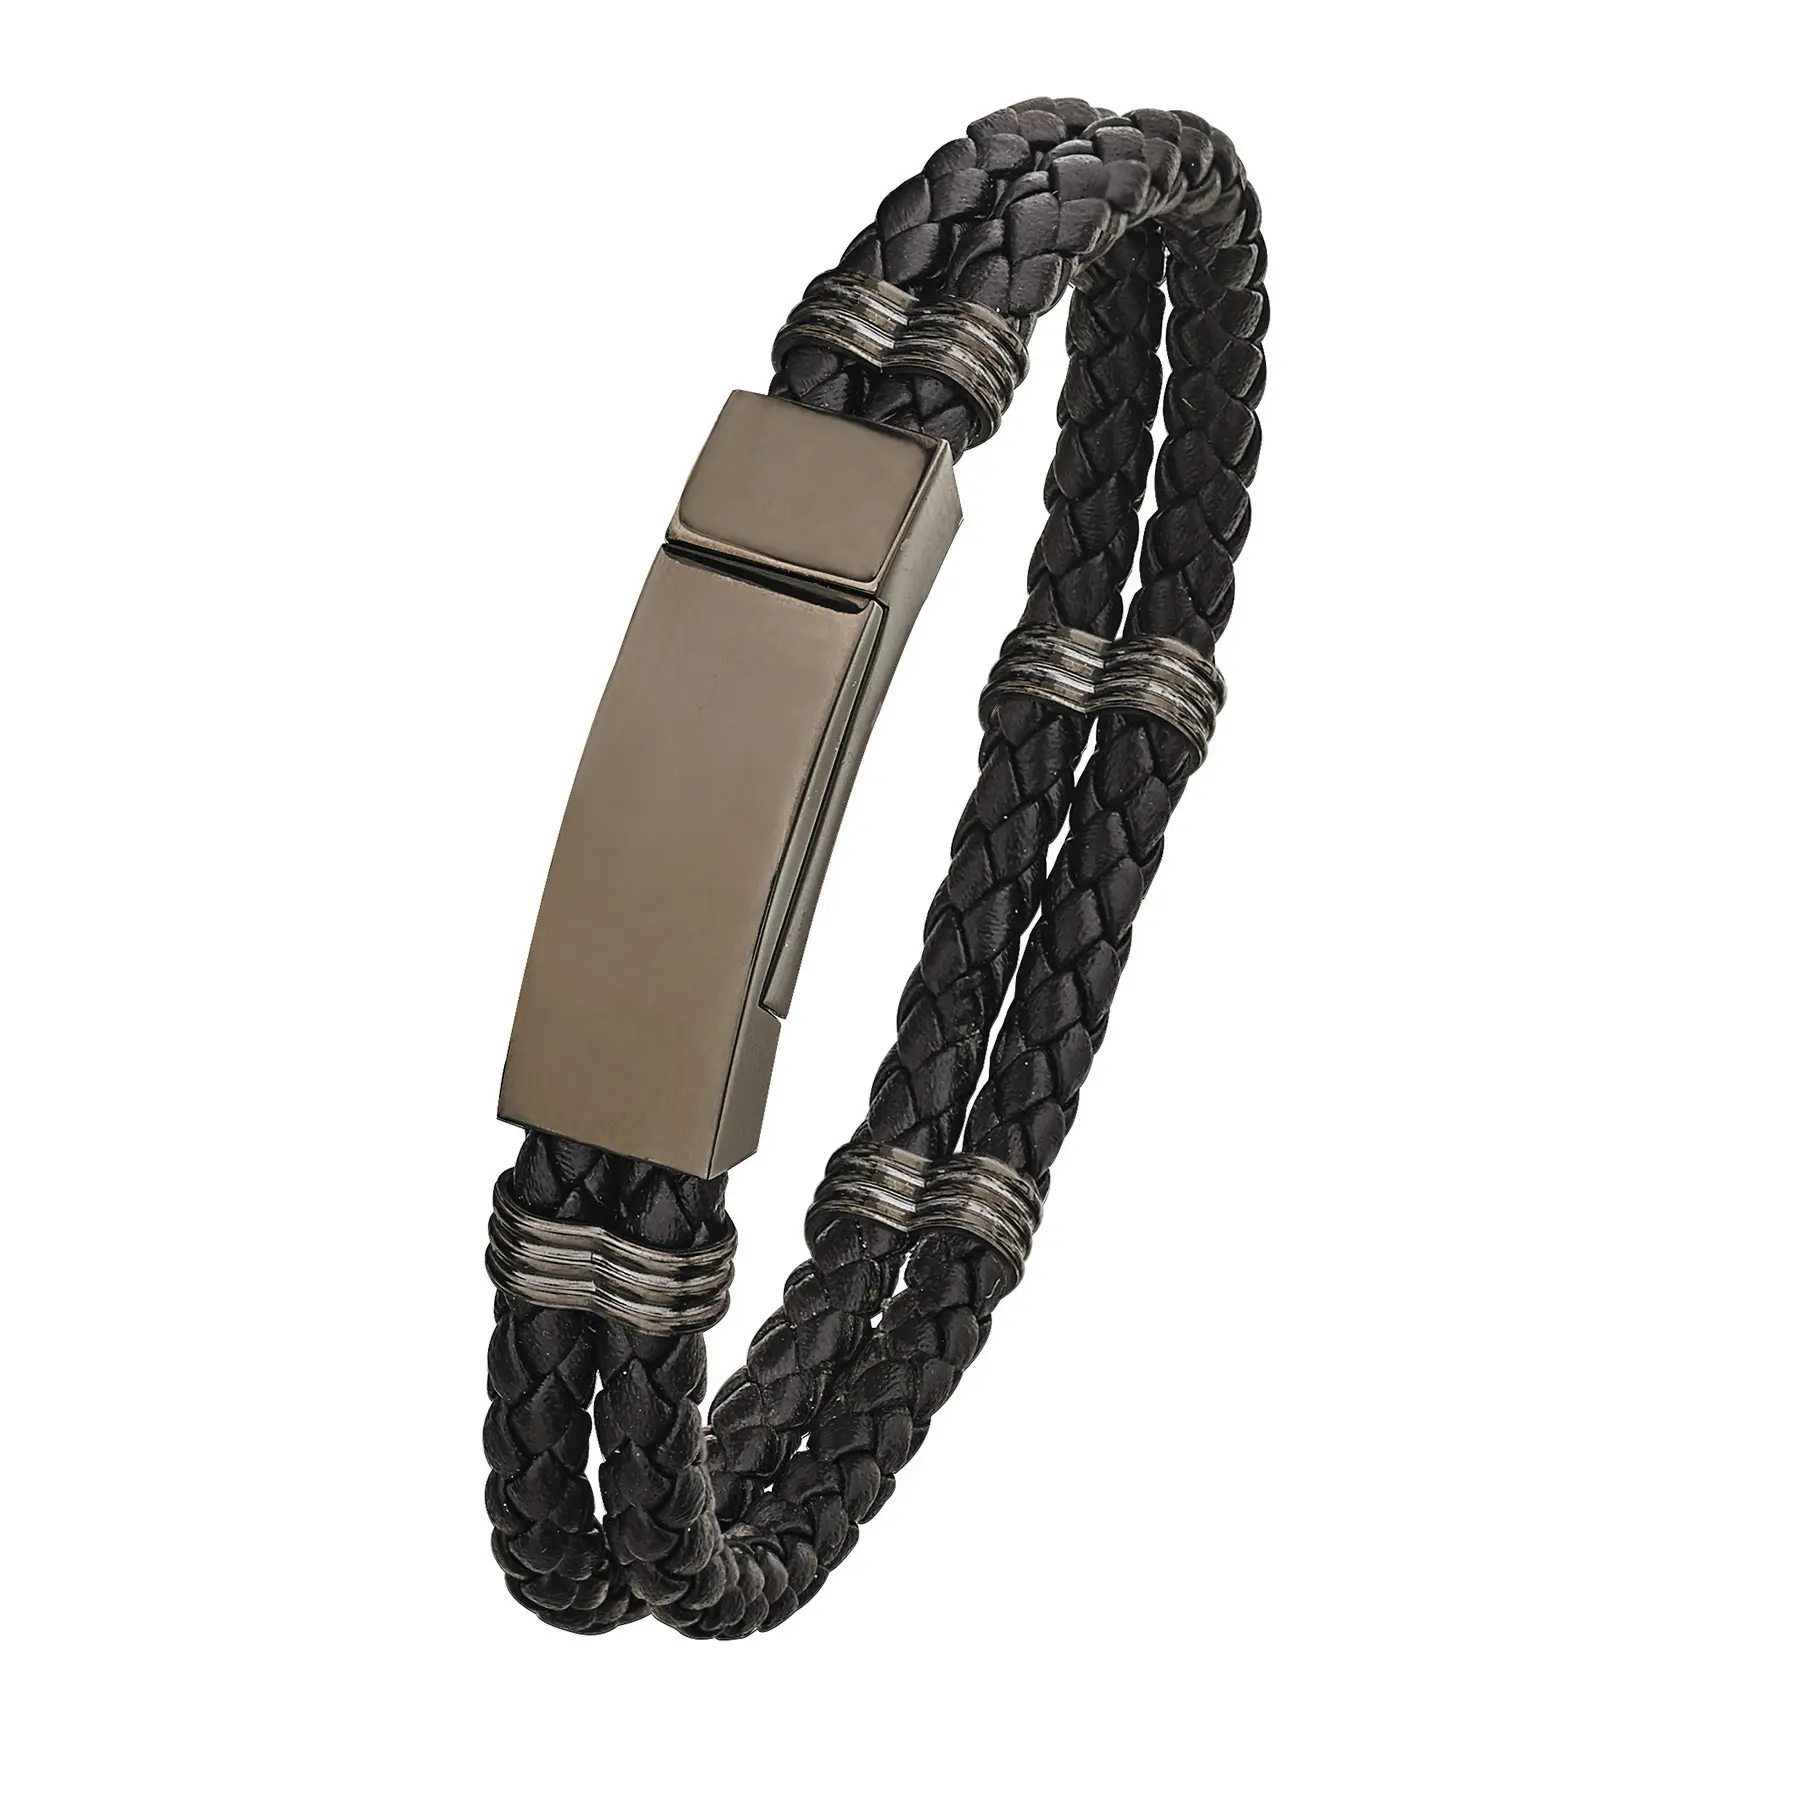 Exclusive Hot Selling Fancy Leather and Stainless Steel Made Buckle Gift Bracelet for Men's at Reliable Market Price